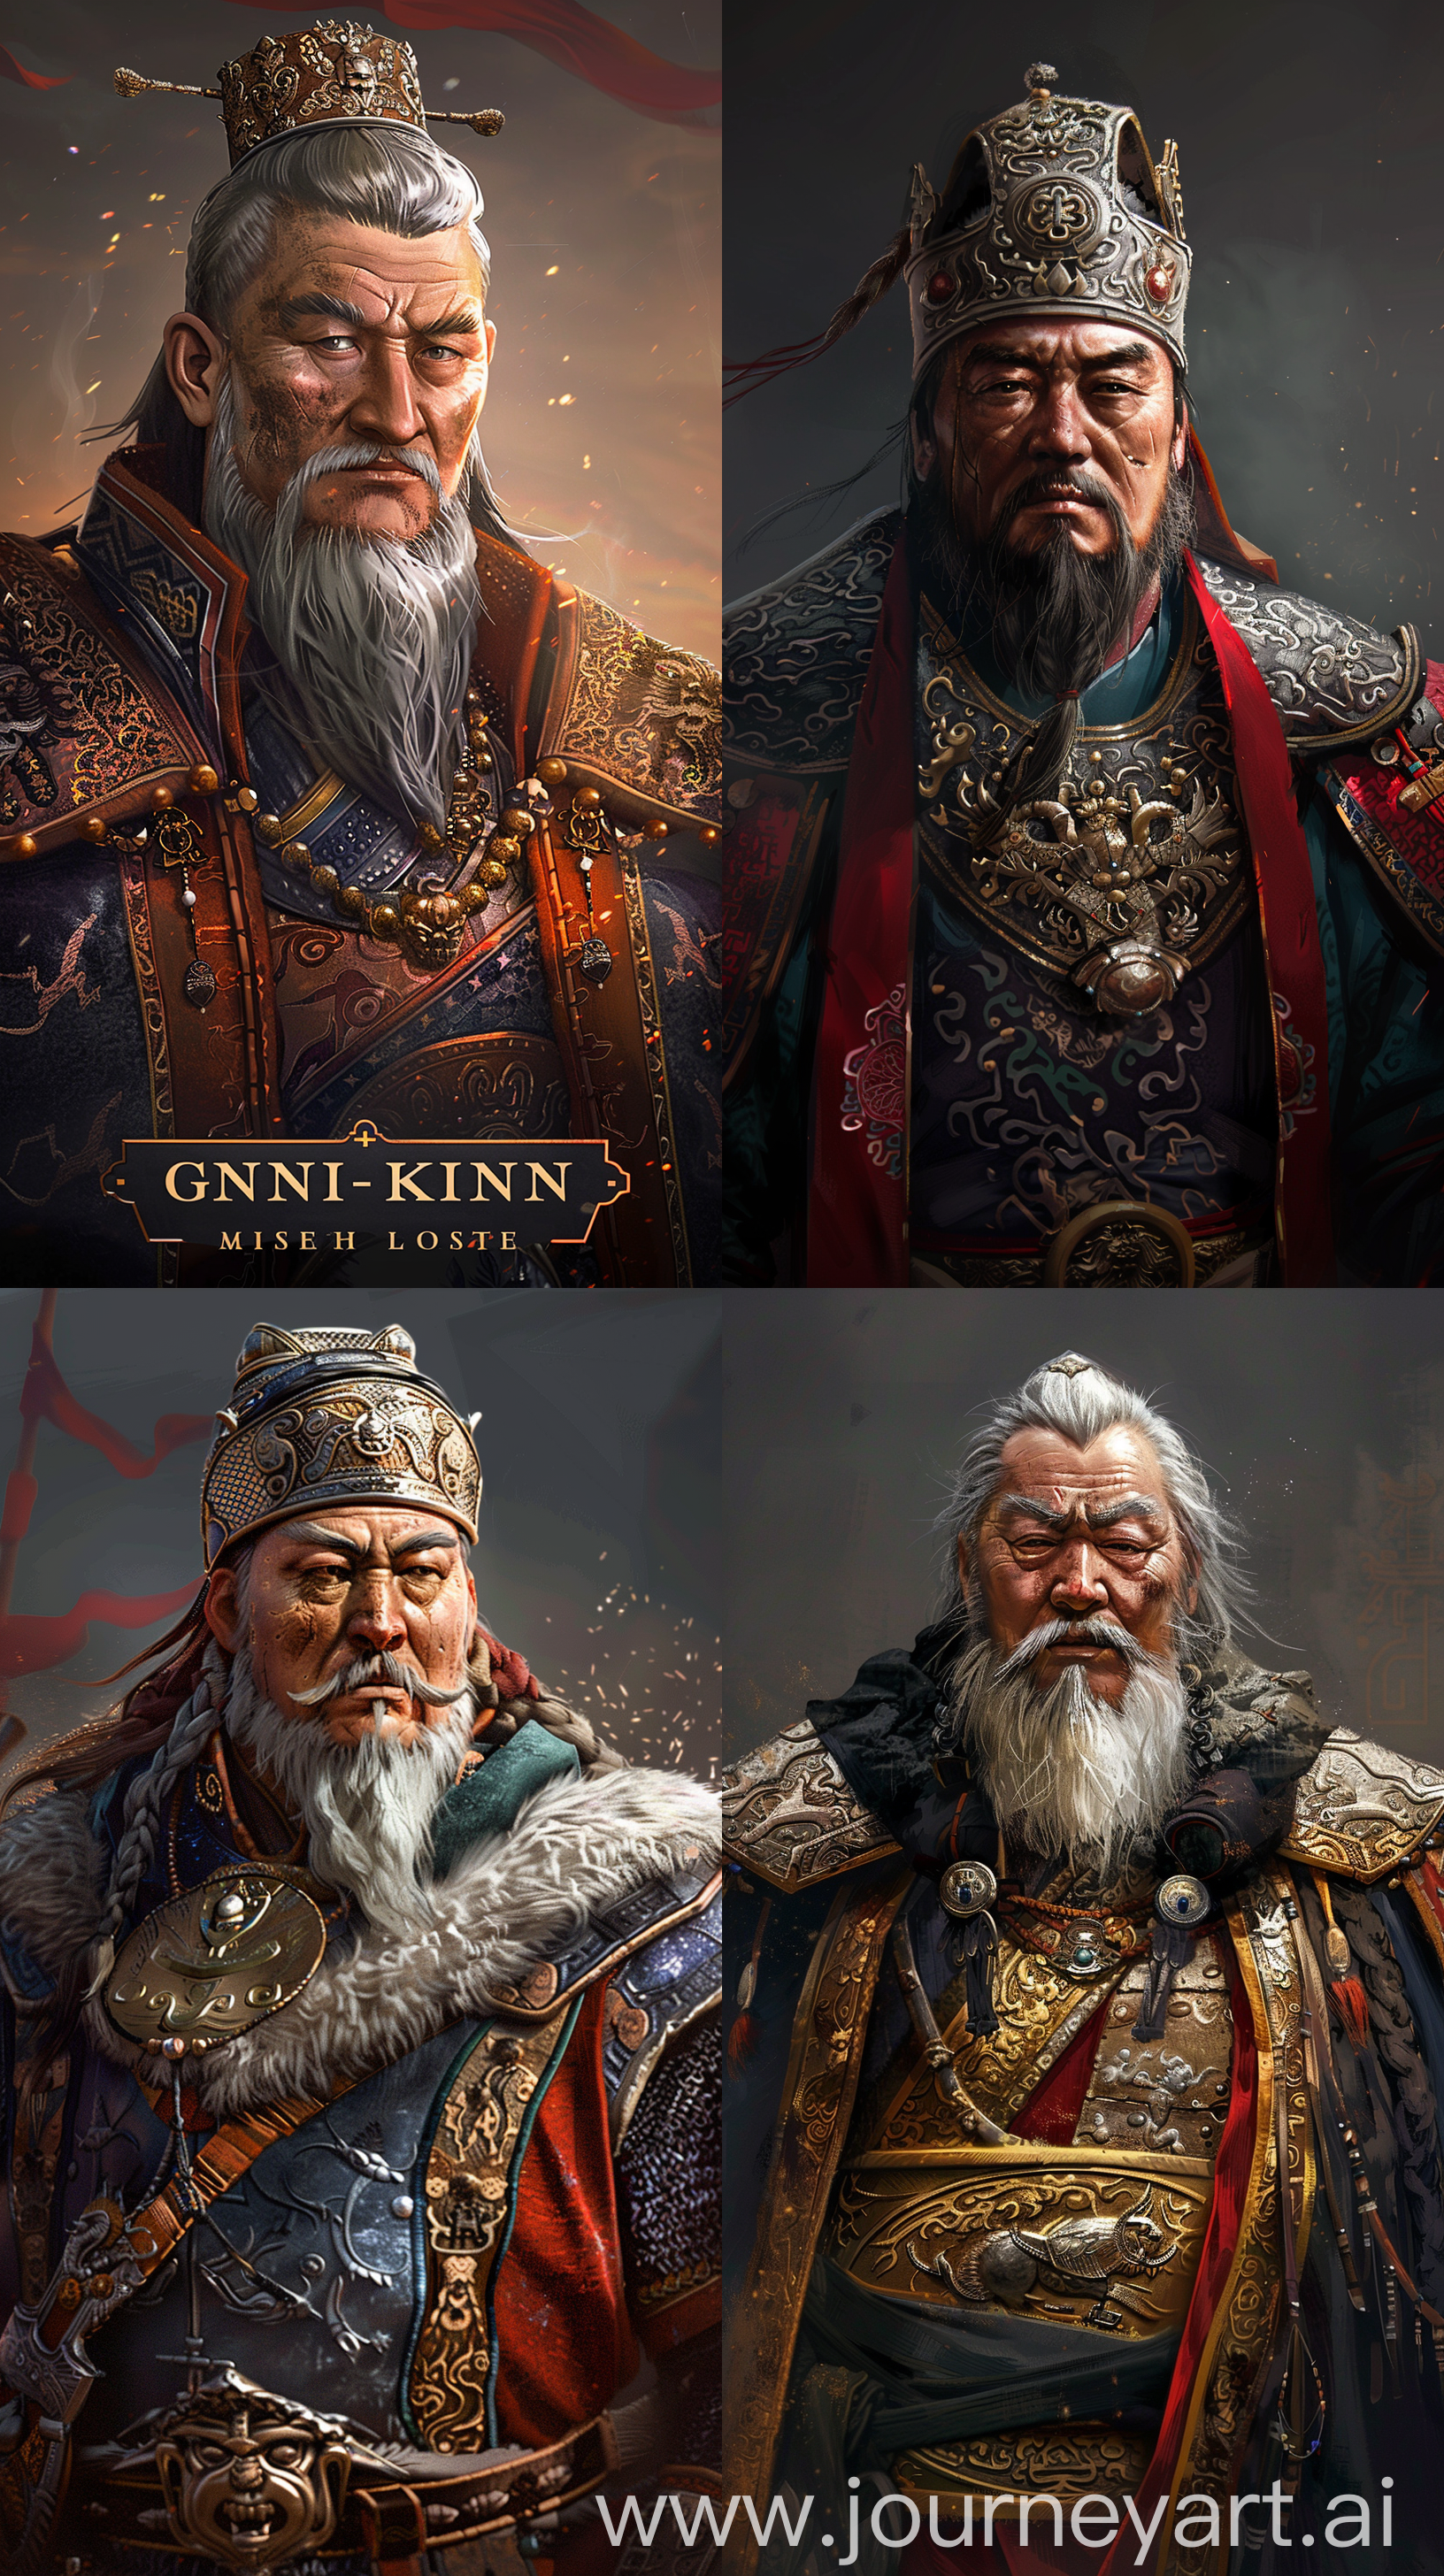 Generate a vivid and detailed description of Genghis Khan as he appears in a historical strategy game, focusing on his appearance, attire, and demeanor. Include elements such as his commanding presence, the weathered features of his face, and the regal attire that signifies his leadership --ar 9:16